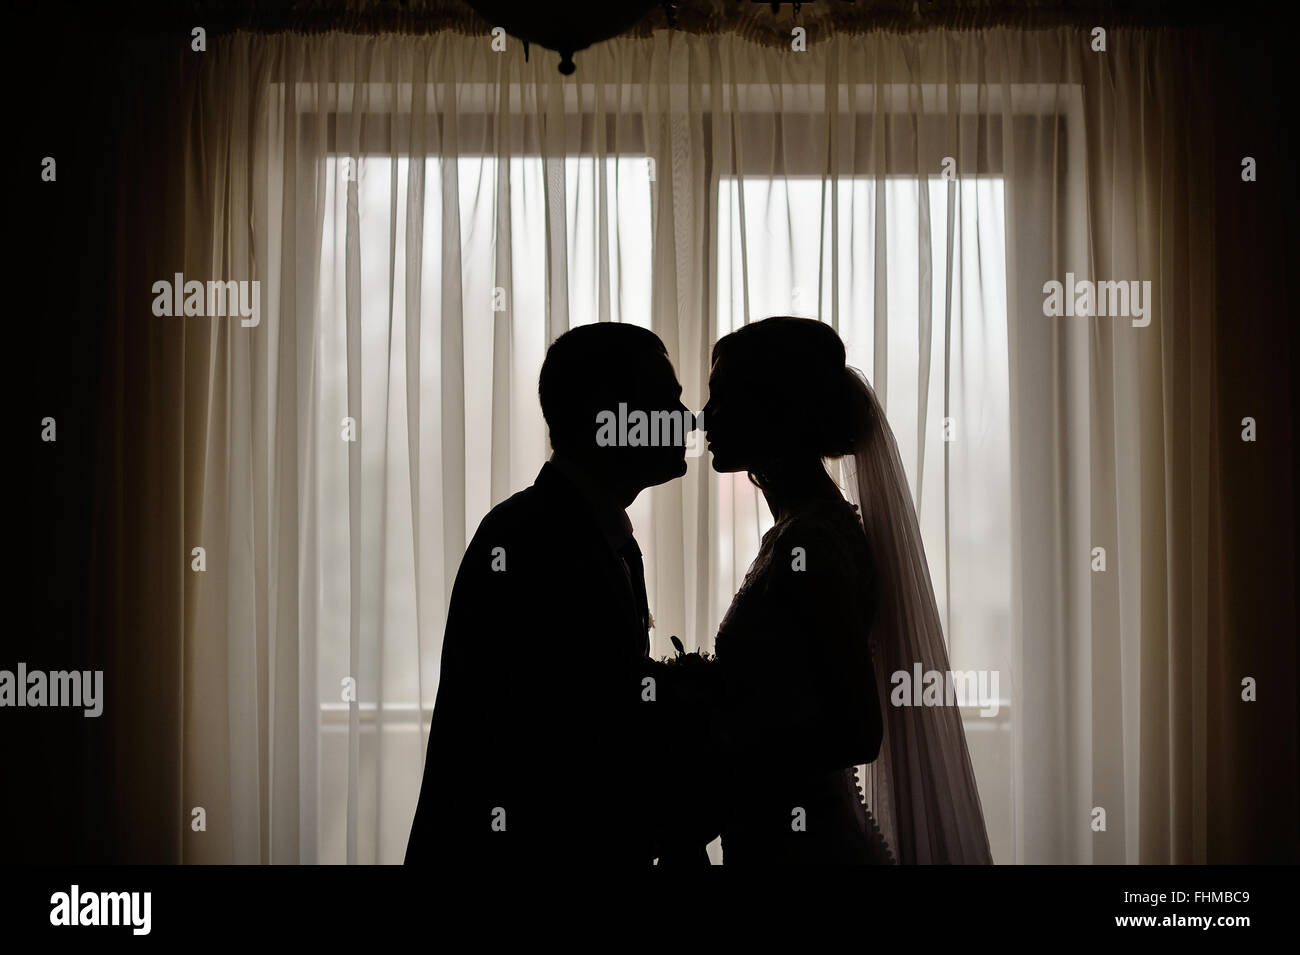 silhouettes of the bride and groom on the background of a window Stock Photo